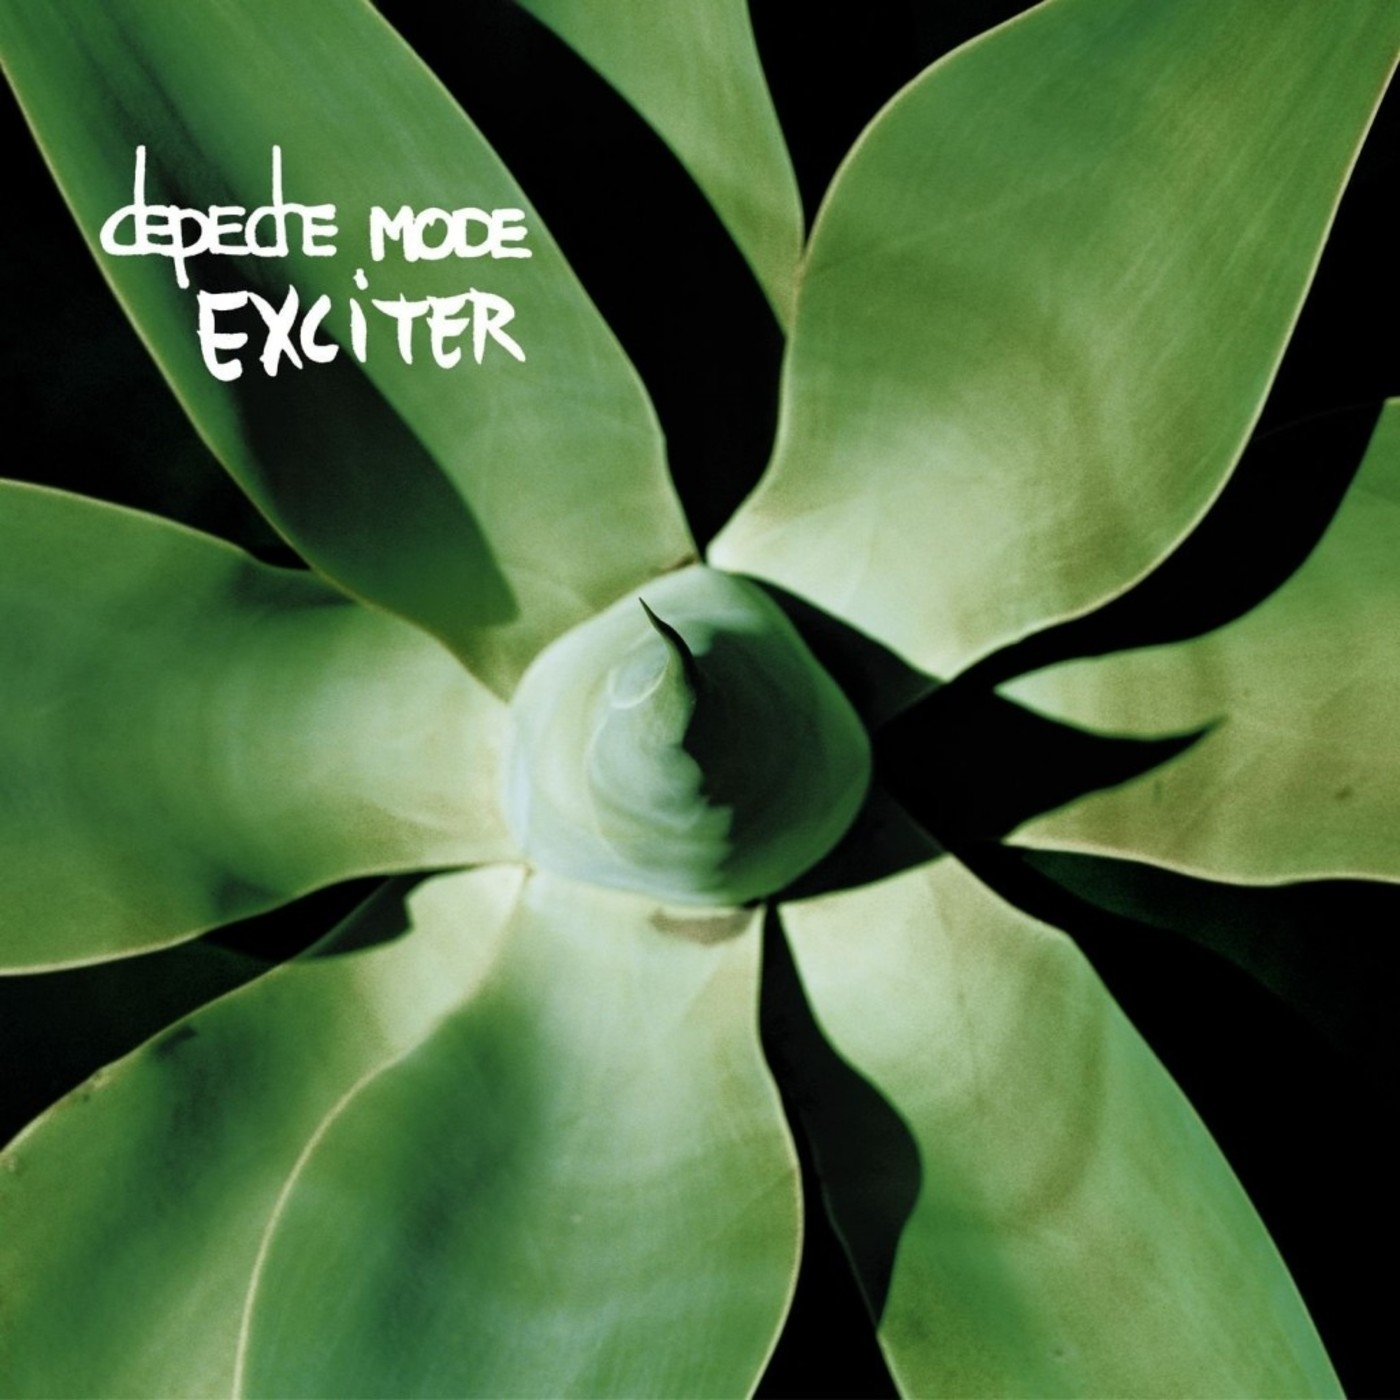 depeche-mode-exciter-album-cover.png